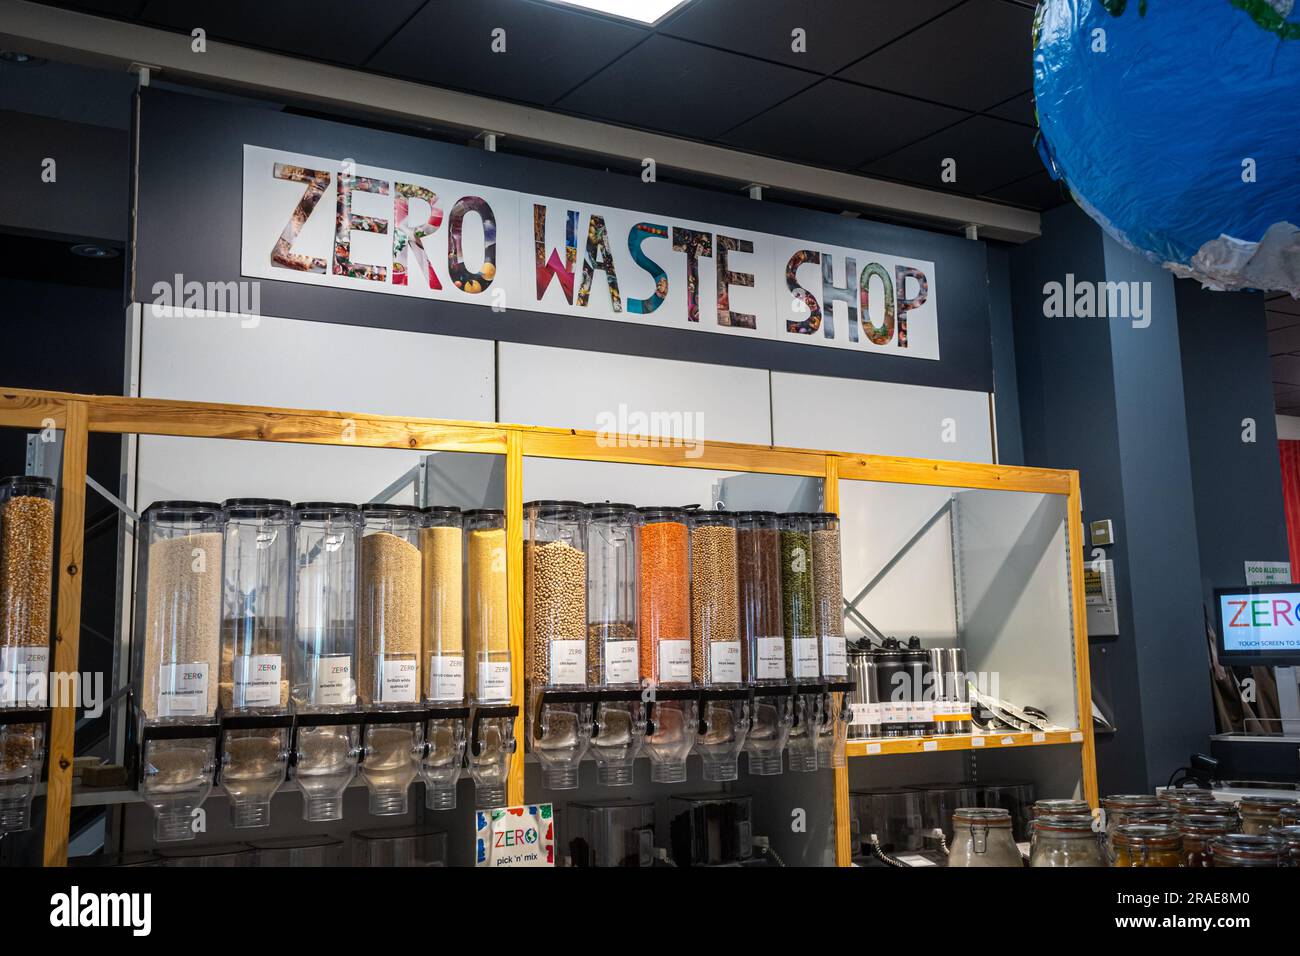 Zero waste shop, dried food to buy plastic-free, good for the environment, sustainable shopping, sustainabiity, Zero Carbon Guildford, Surrey, UK Stock Photo